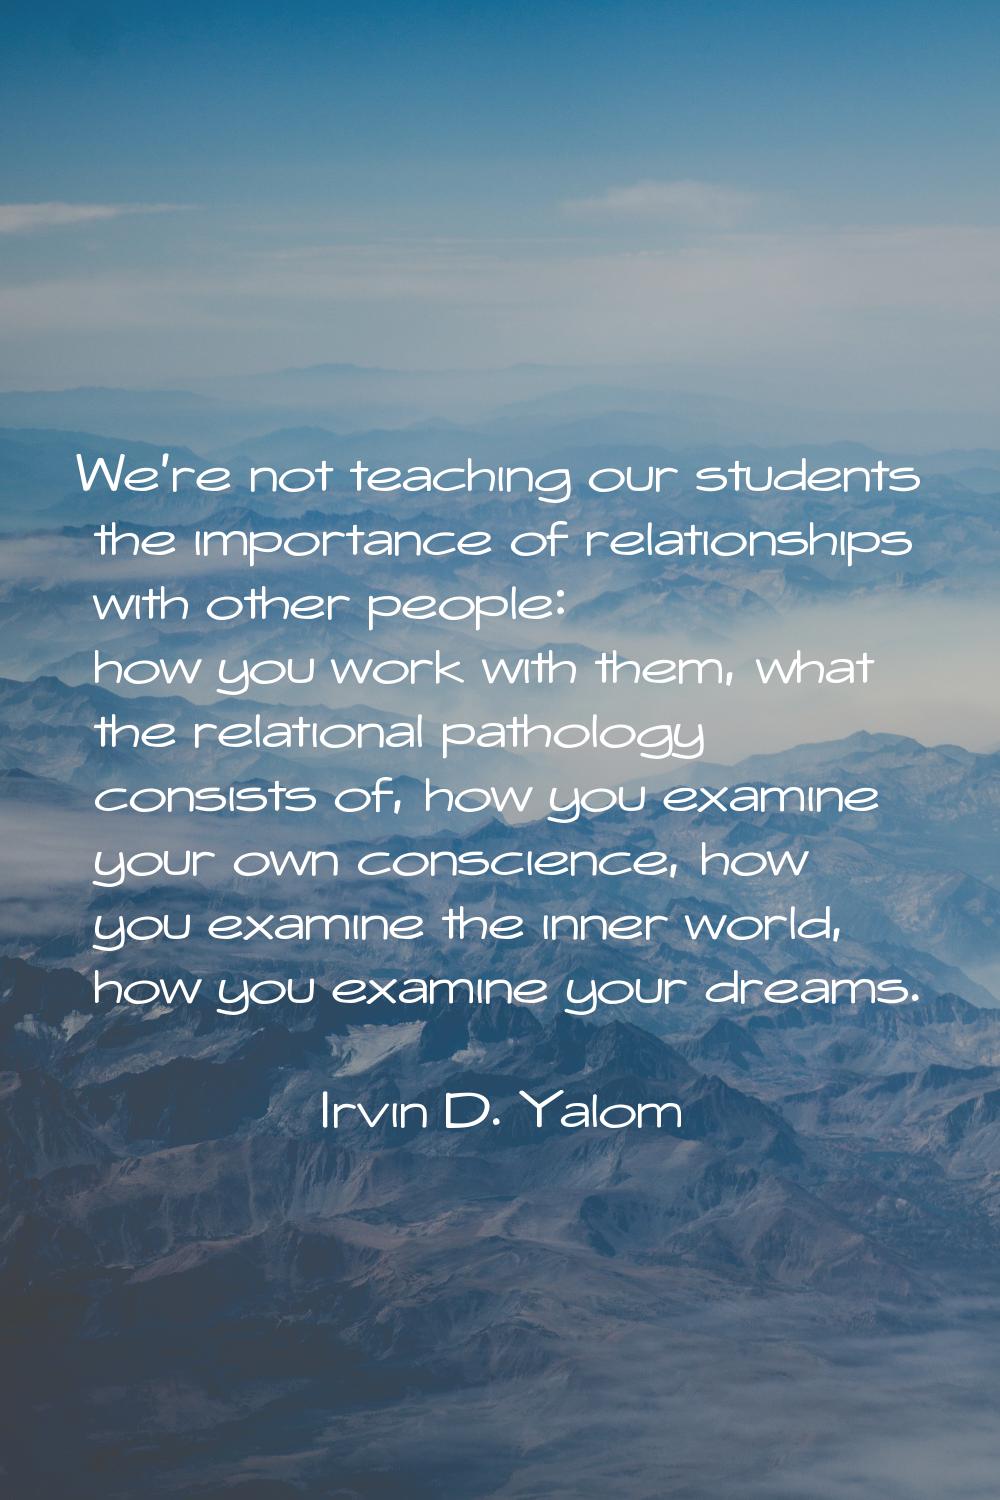 We're not teaching our students the importance of relationships with other people: how you work wit